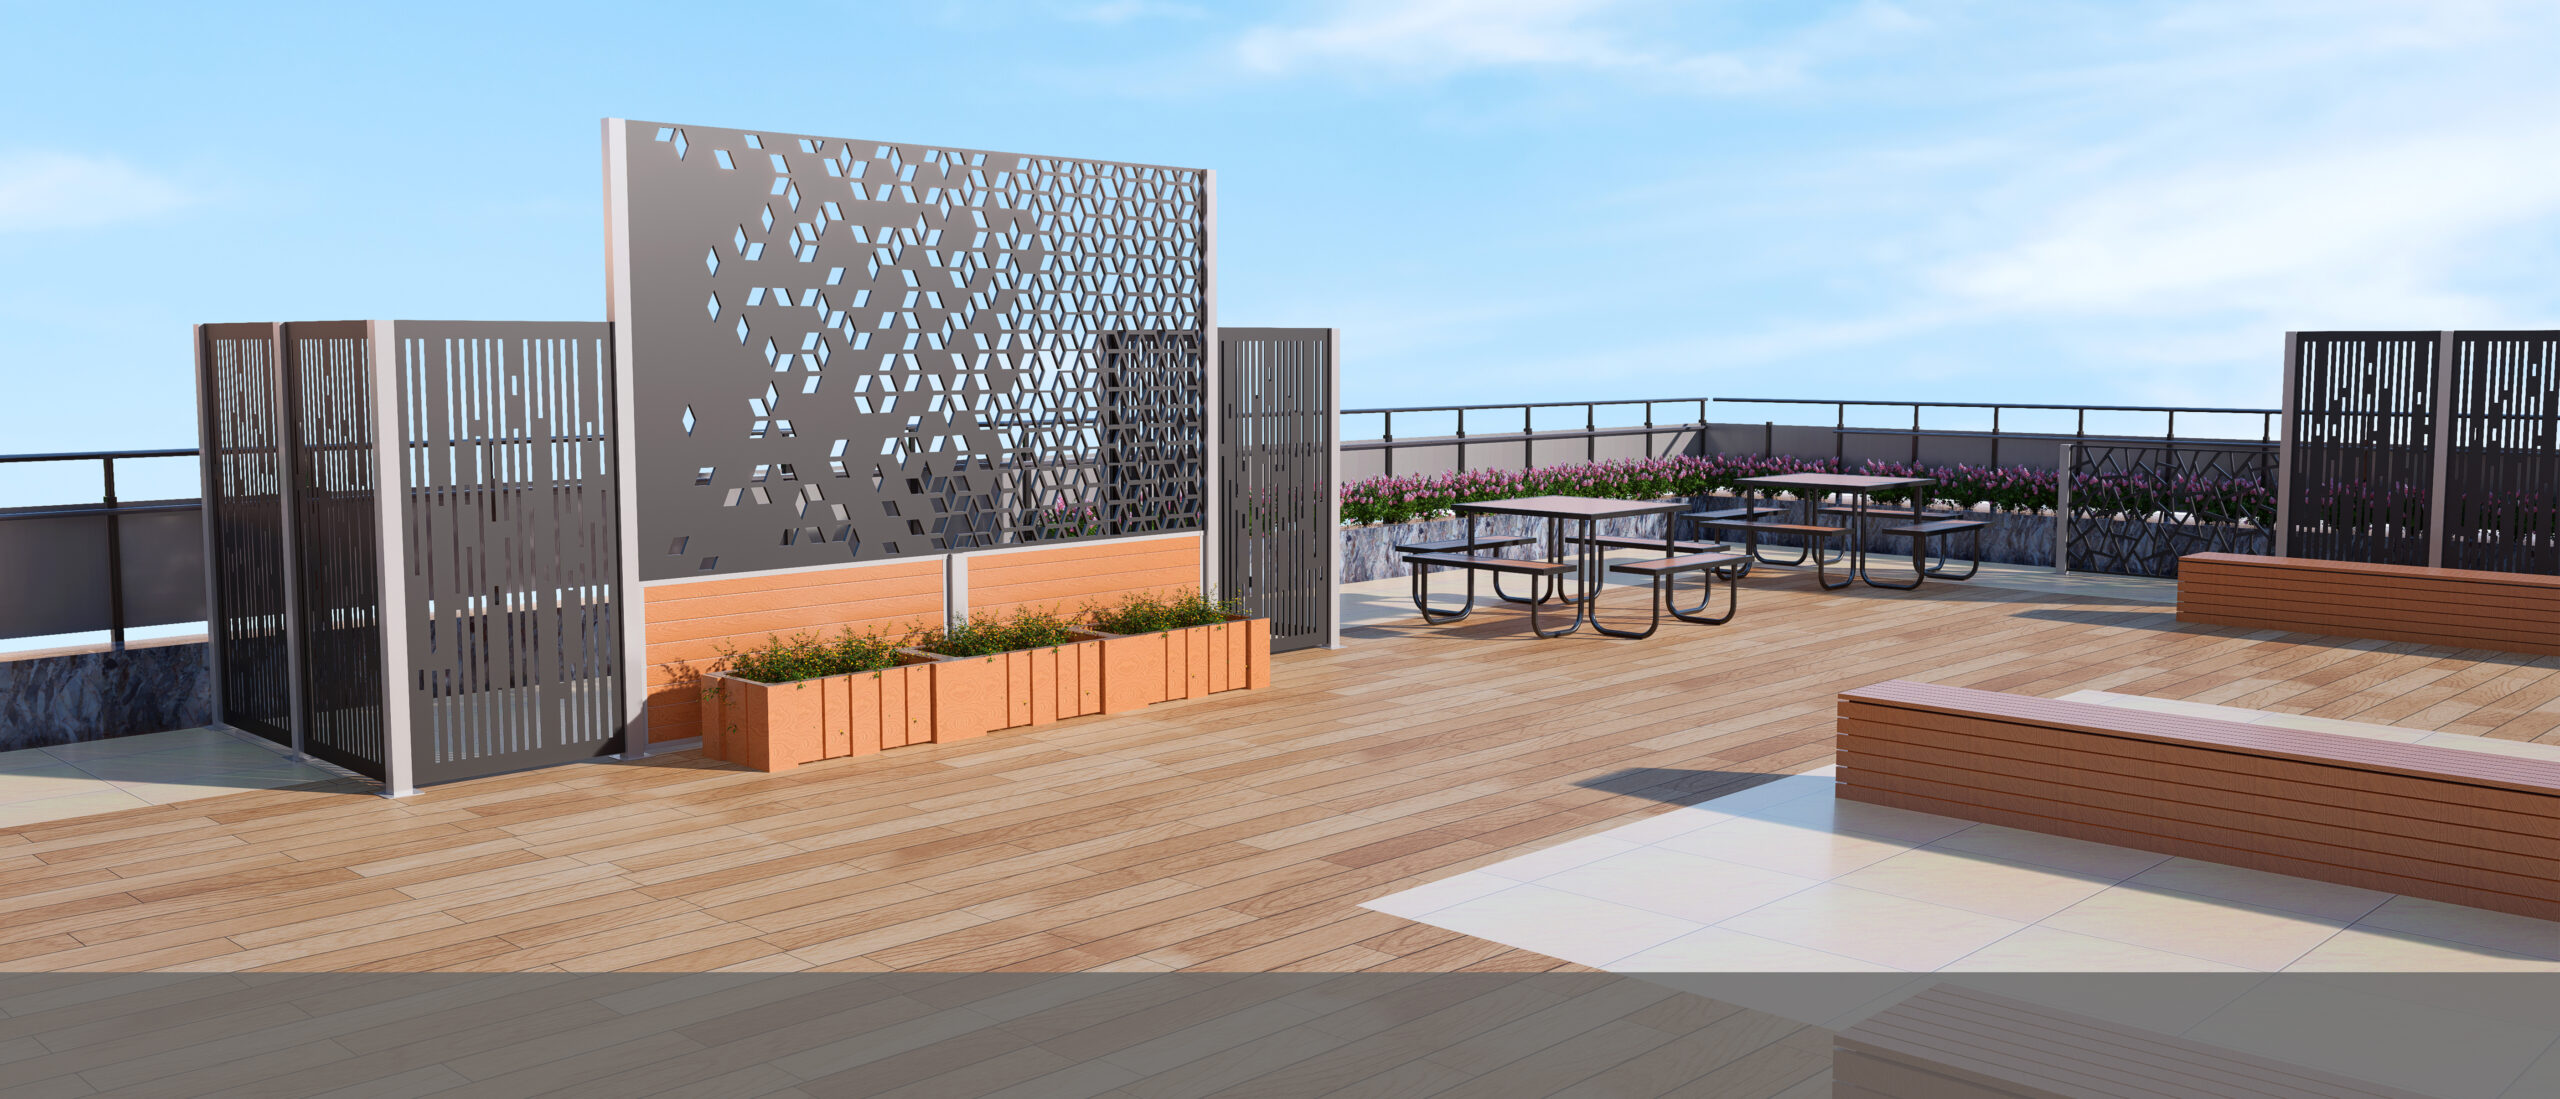 wall panel & picnic table & commercial bench on a rooftop patio of a commercial building